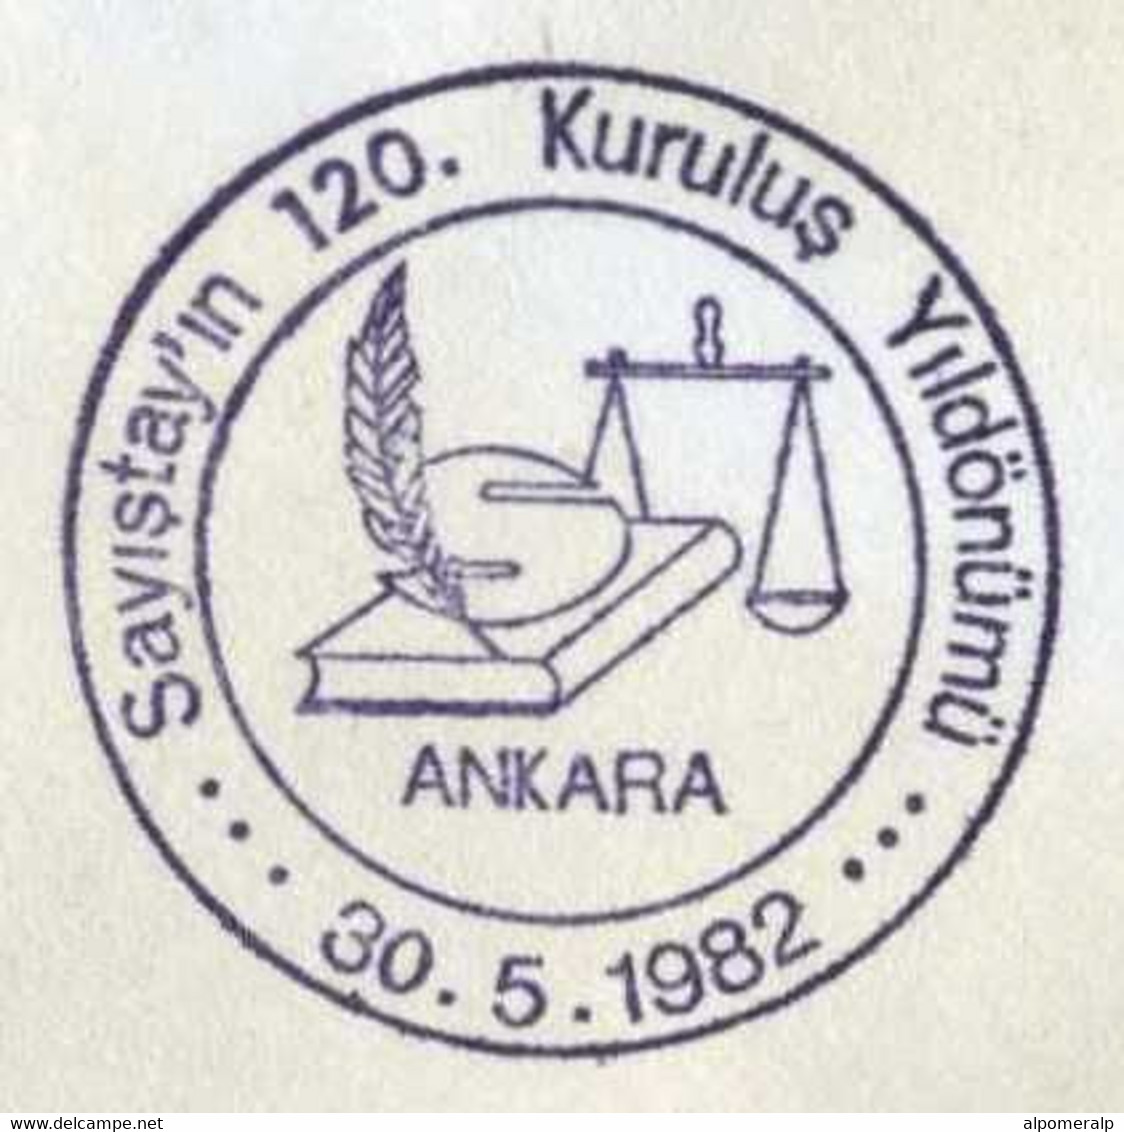 Türkiye 1982 120th Anniv. Of The Turkish Court Of Accounts | Law, Scales, Book, Pen, Special Cover - Cartas & Documentos